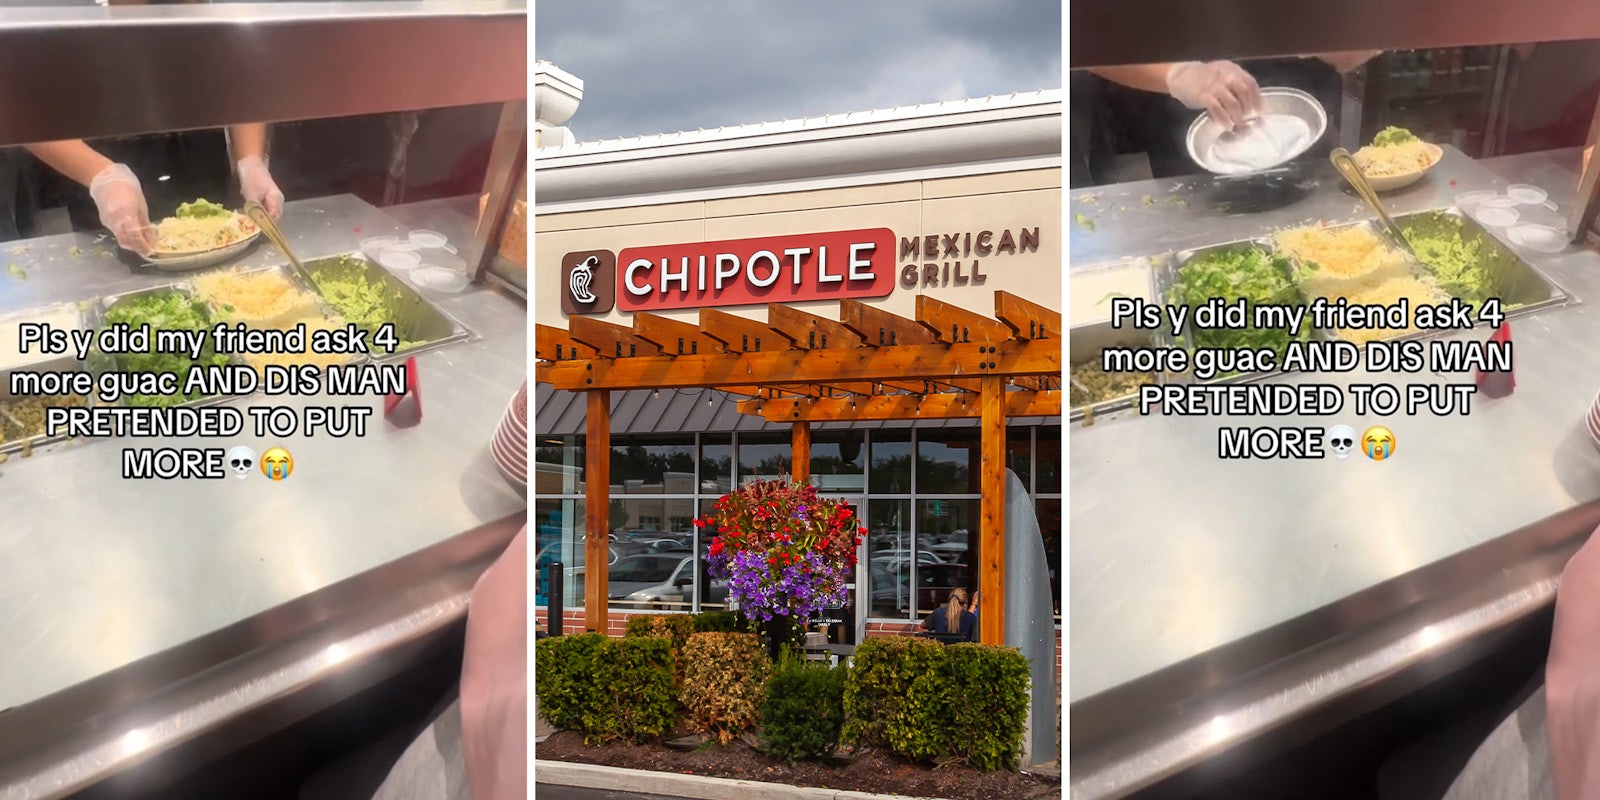 Customer says Chipotle worker pretended to give her more guacamole when she asked for extra